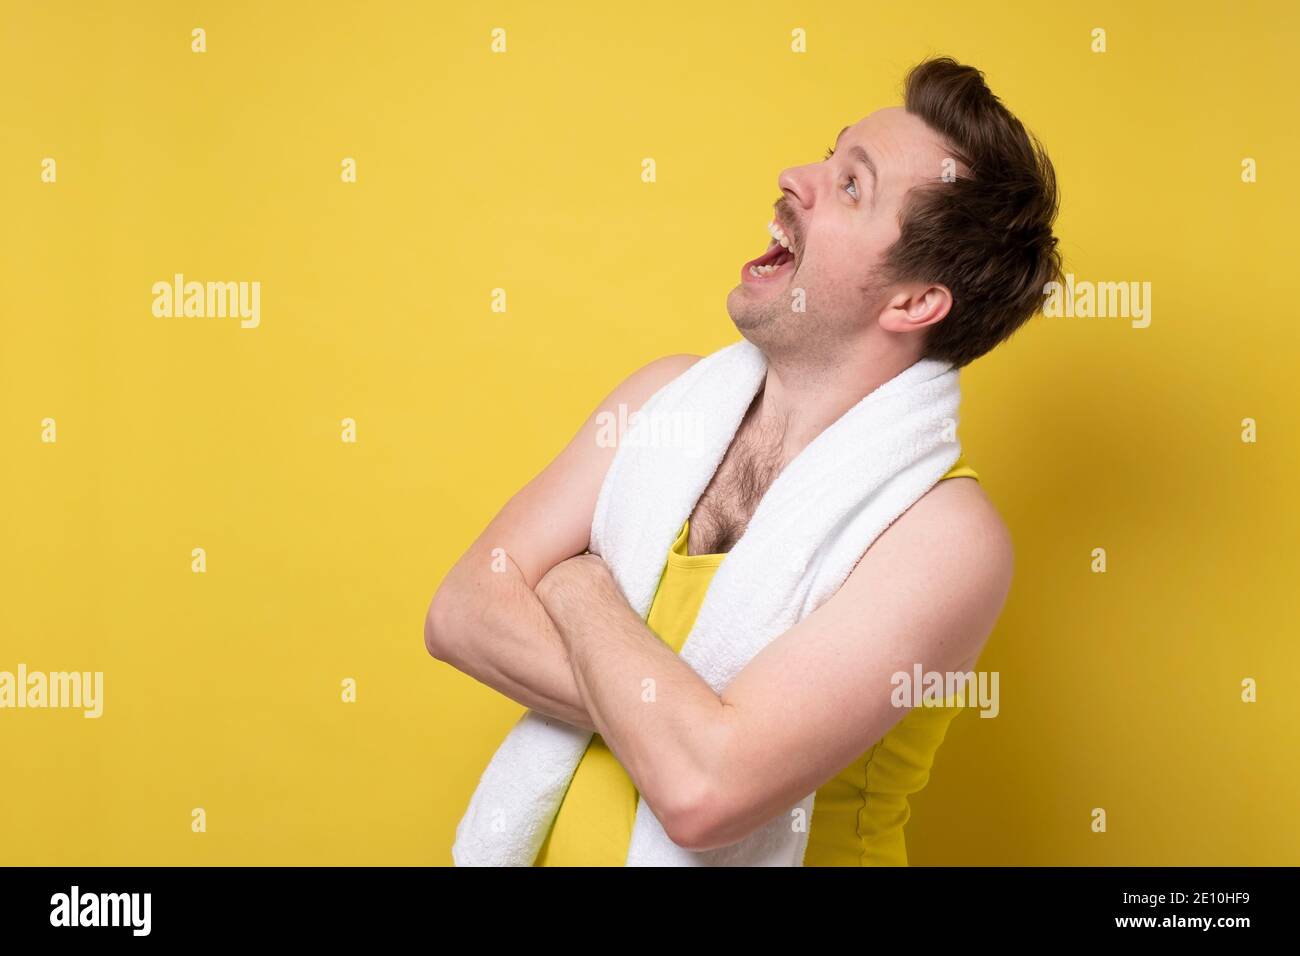 Young caucasian sport man with towel being surprised looking up. Studio shot on yellow wall. Stock Photo